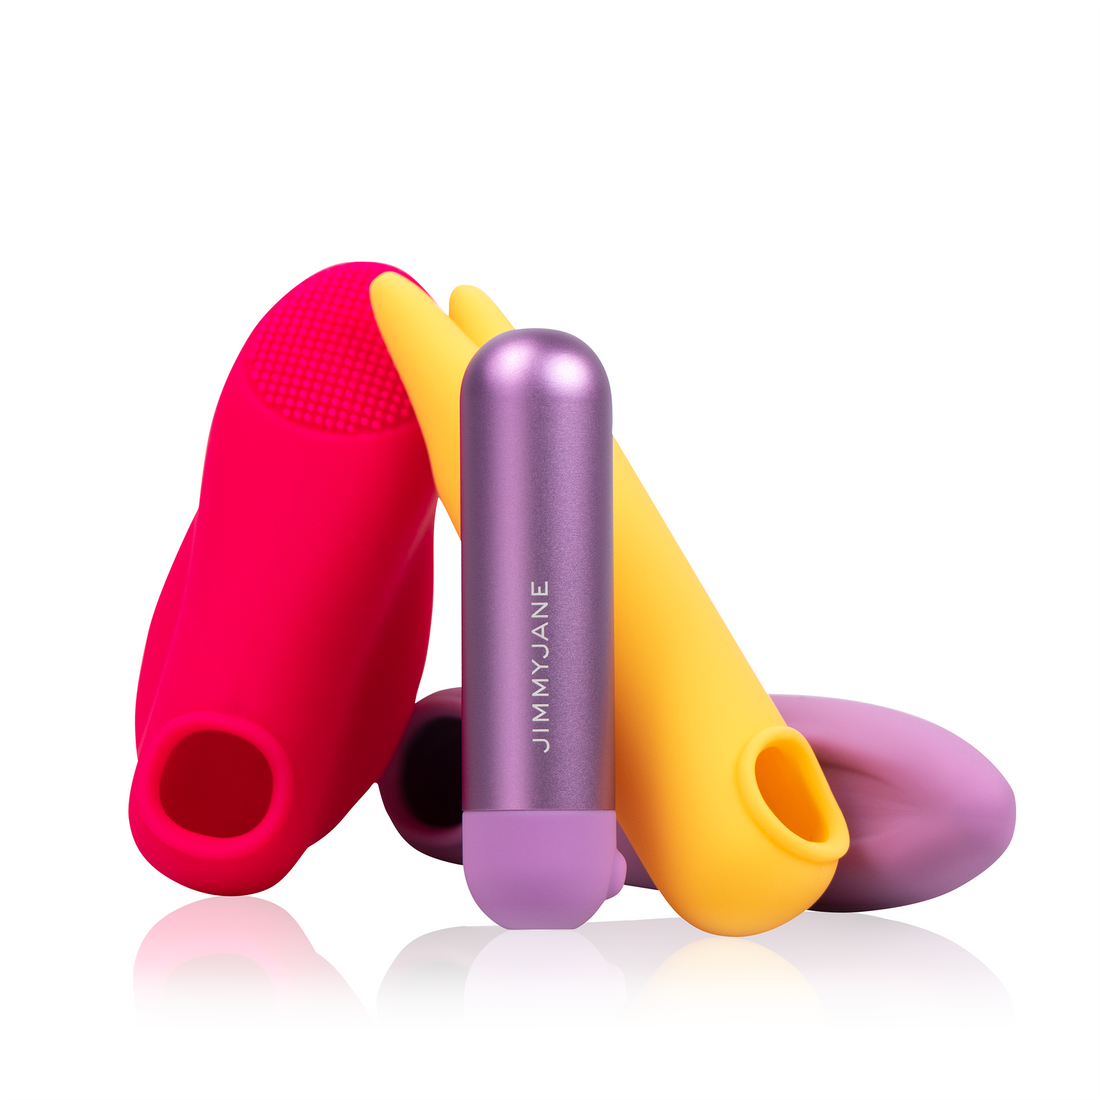 Mini bullet vibrator in the purple color with sleeves